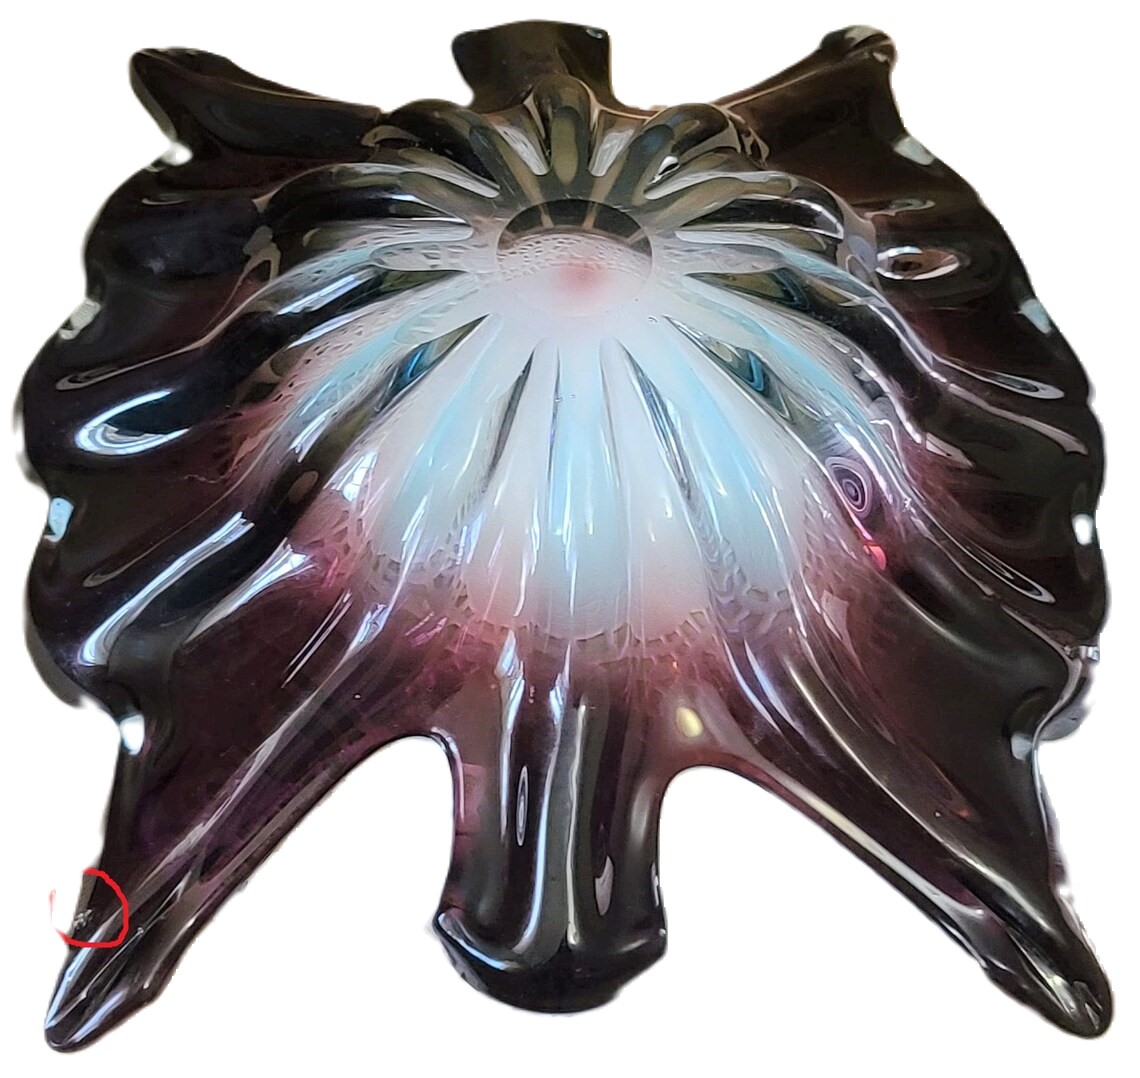 Vintage murano glass large candy dish, amethyst and teal blue